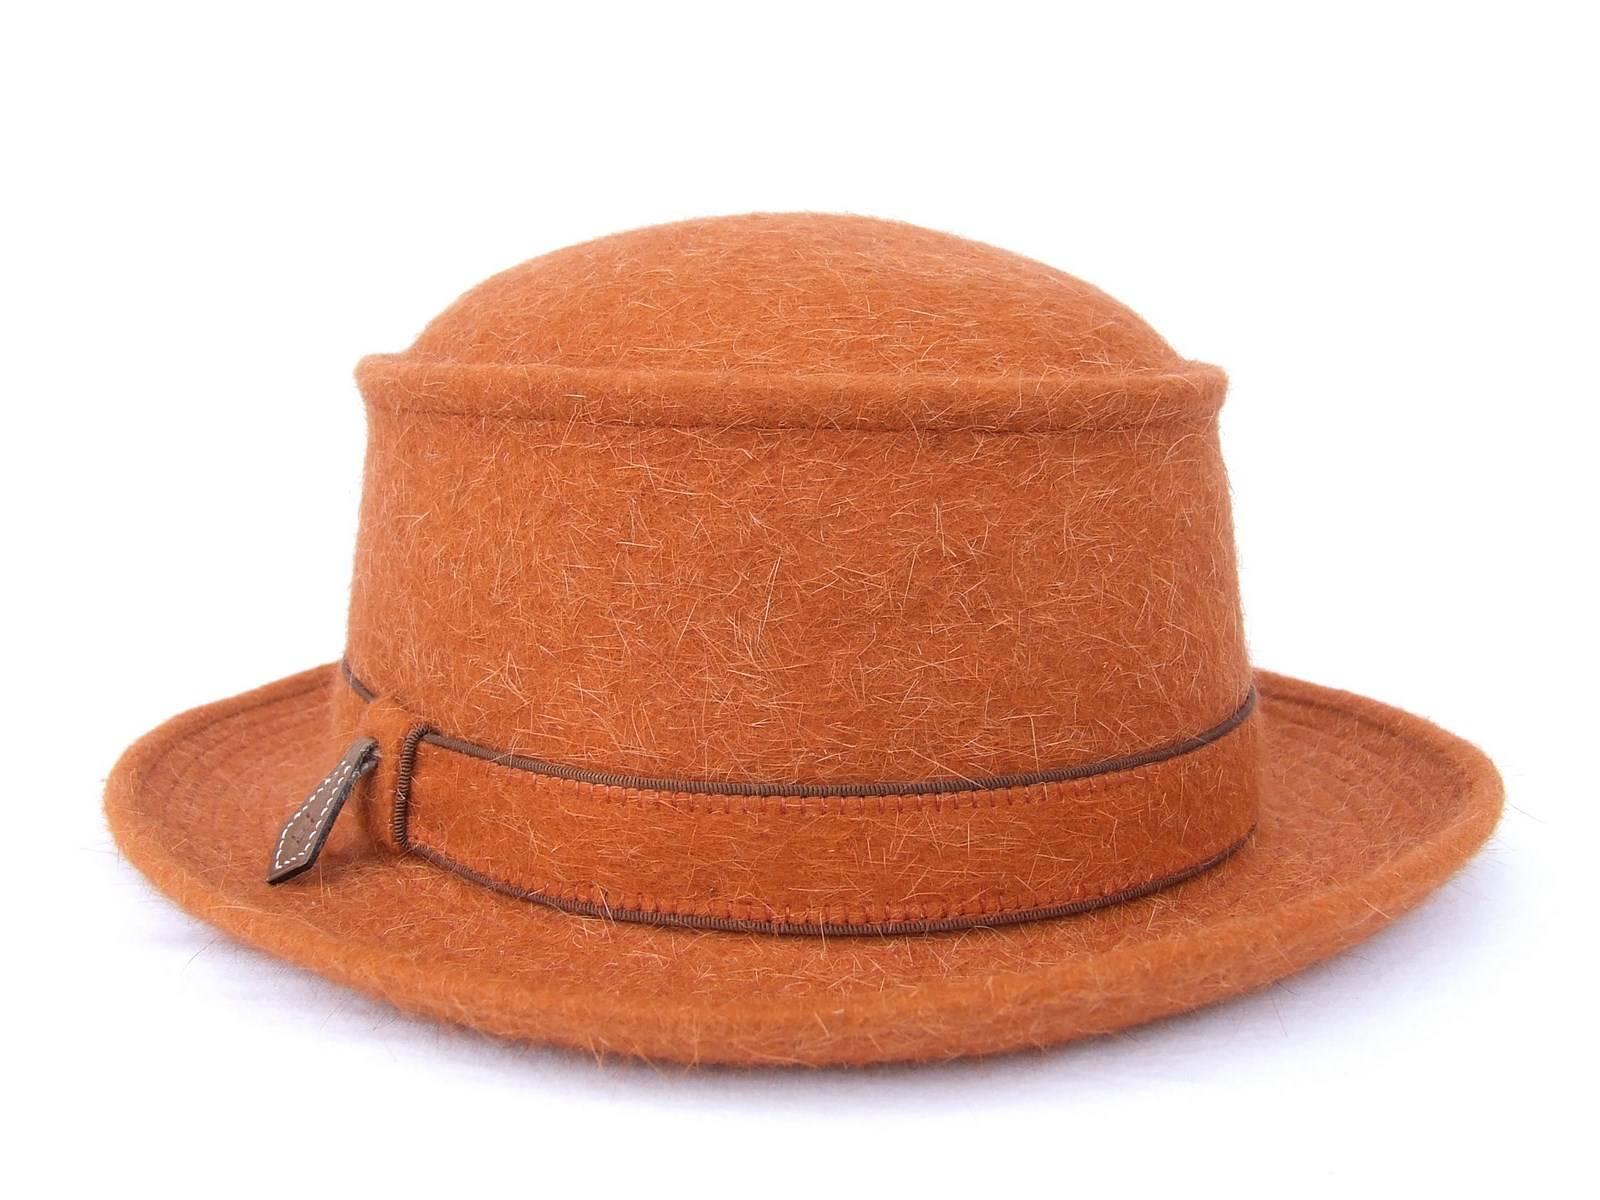 Absolutely Gorgeous Authentic Hat

Made by Motsch Paris for Hermes

No idea about the date of creation of this hat. I prefer to put it in vintage as Hermes bought Motsch in 1991 and I do not know if the tags still the same since. 

Made of 100%